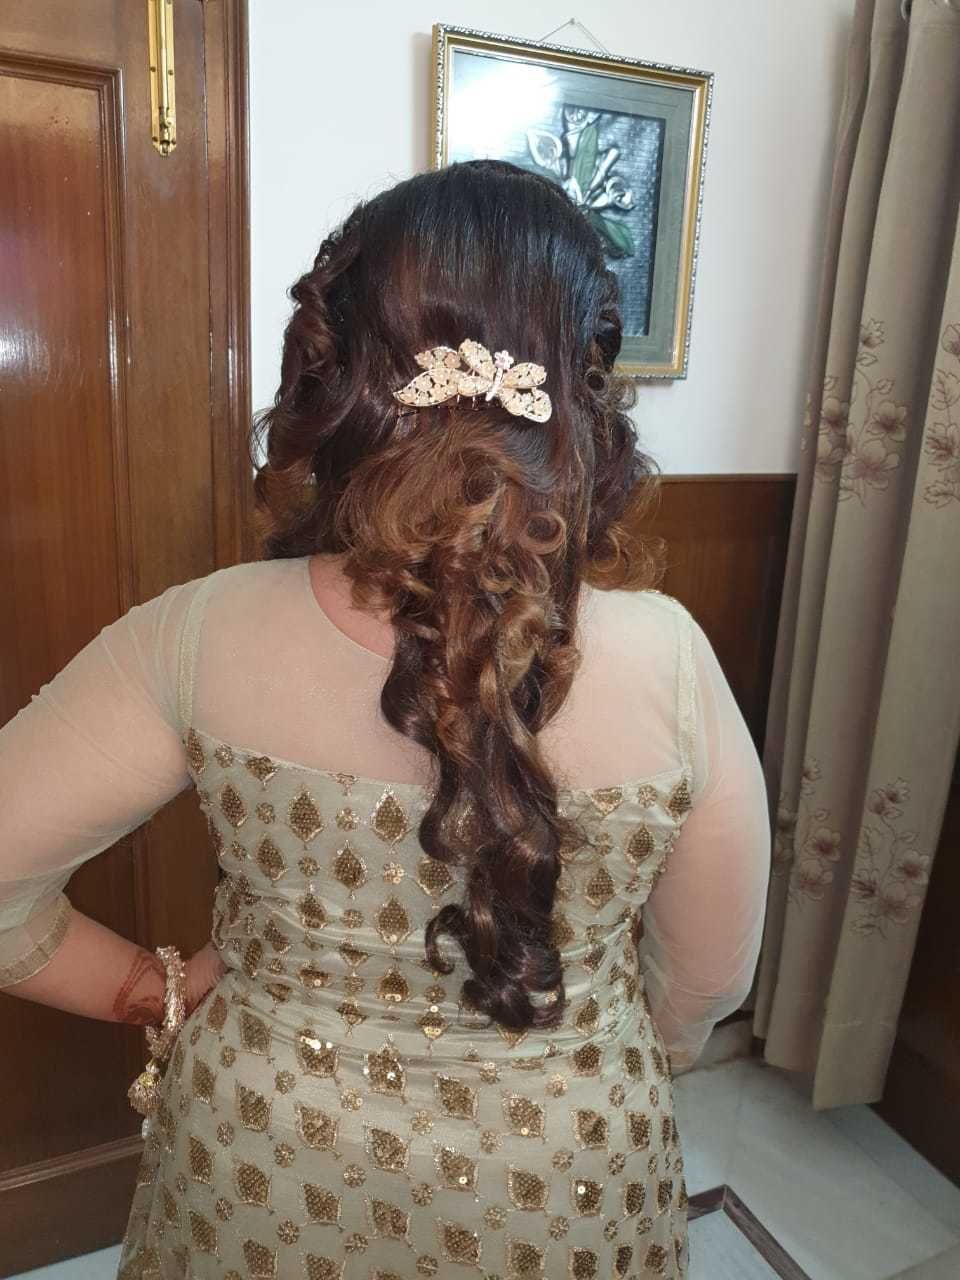 Photo From Hair Goals - By Artistry by Surbhi